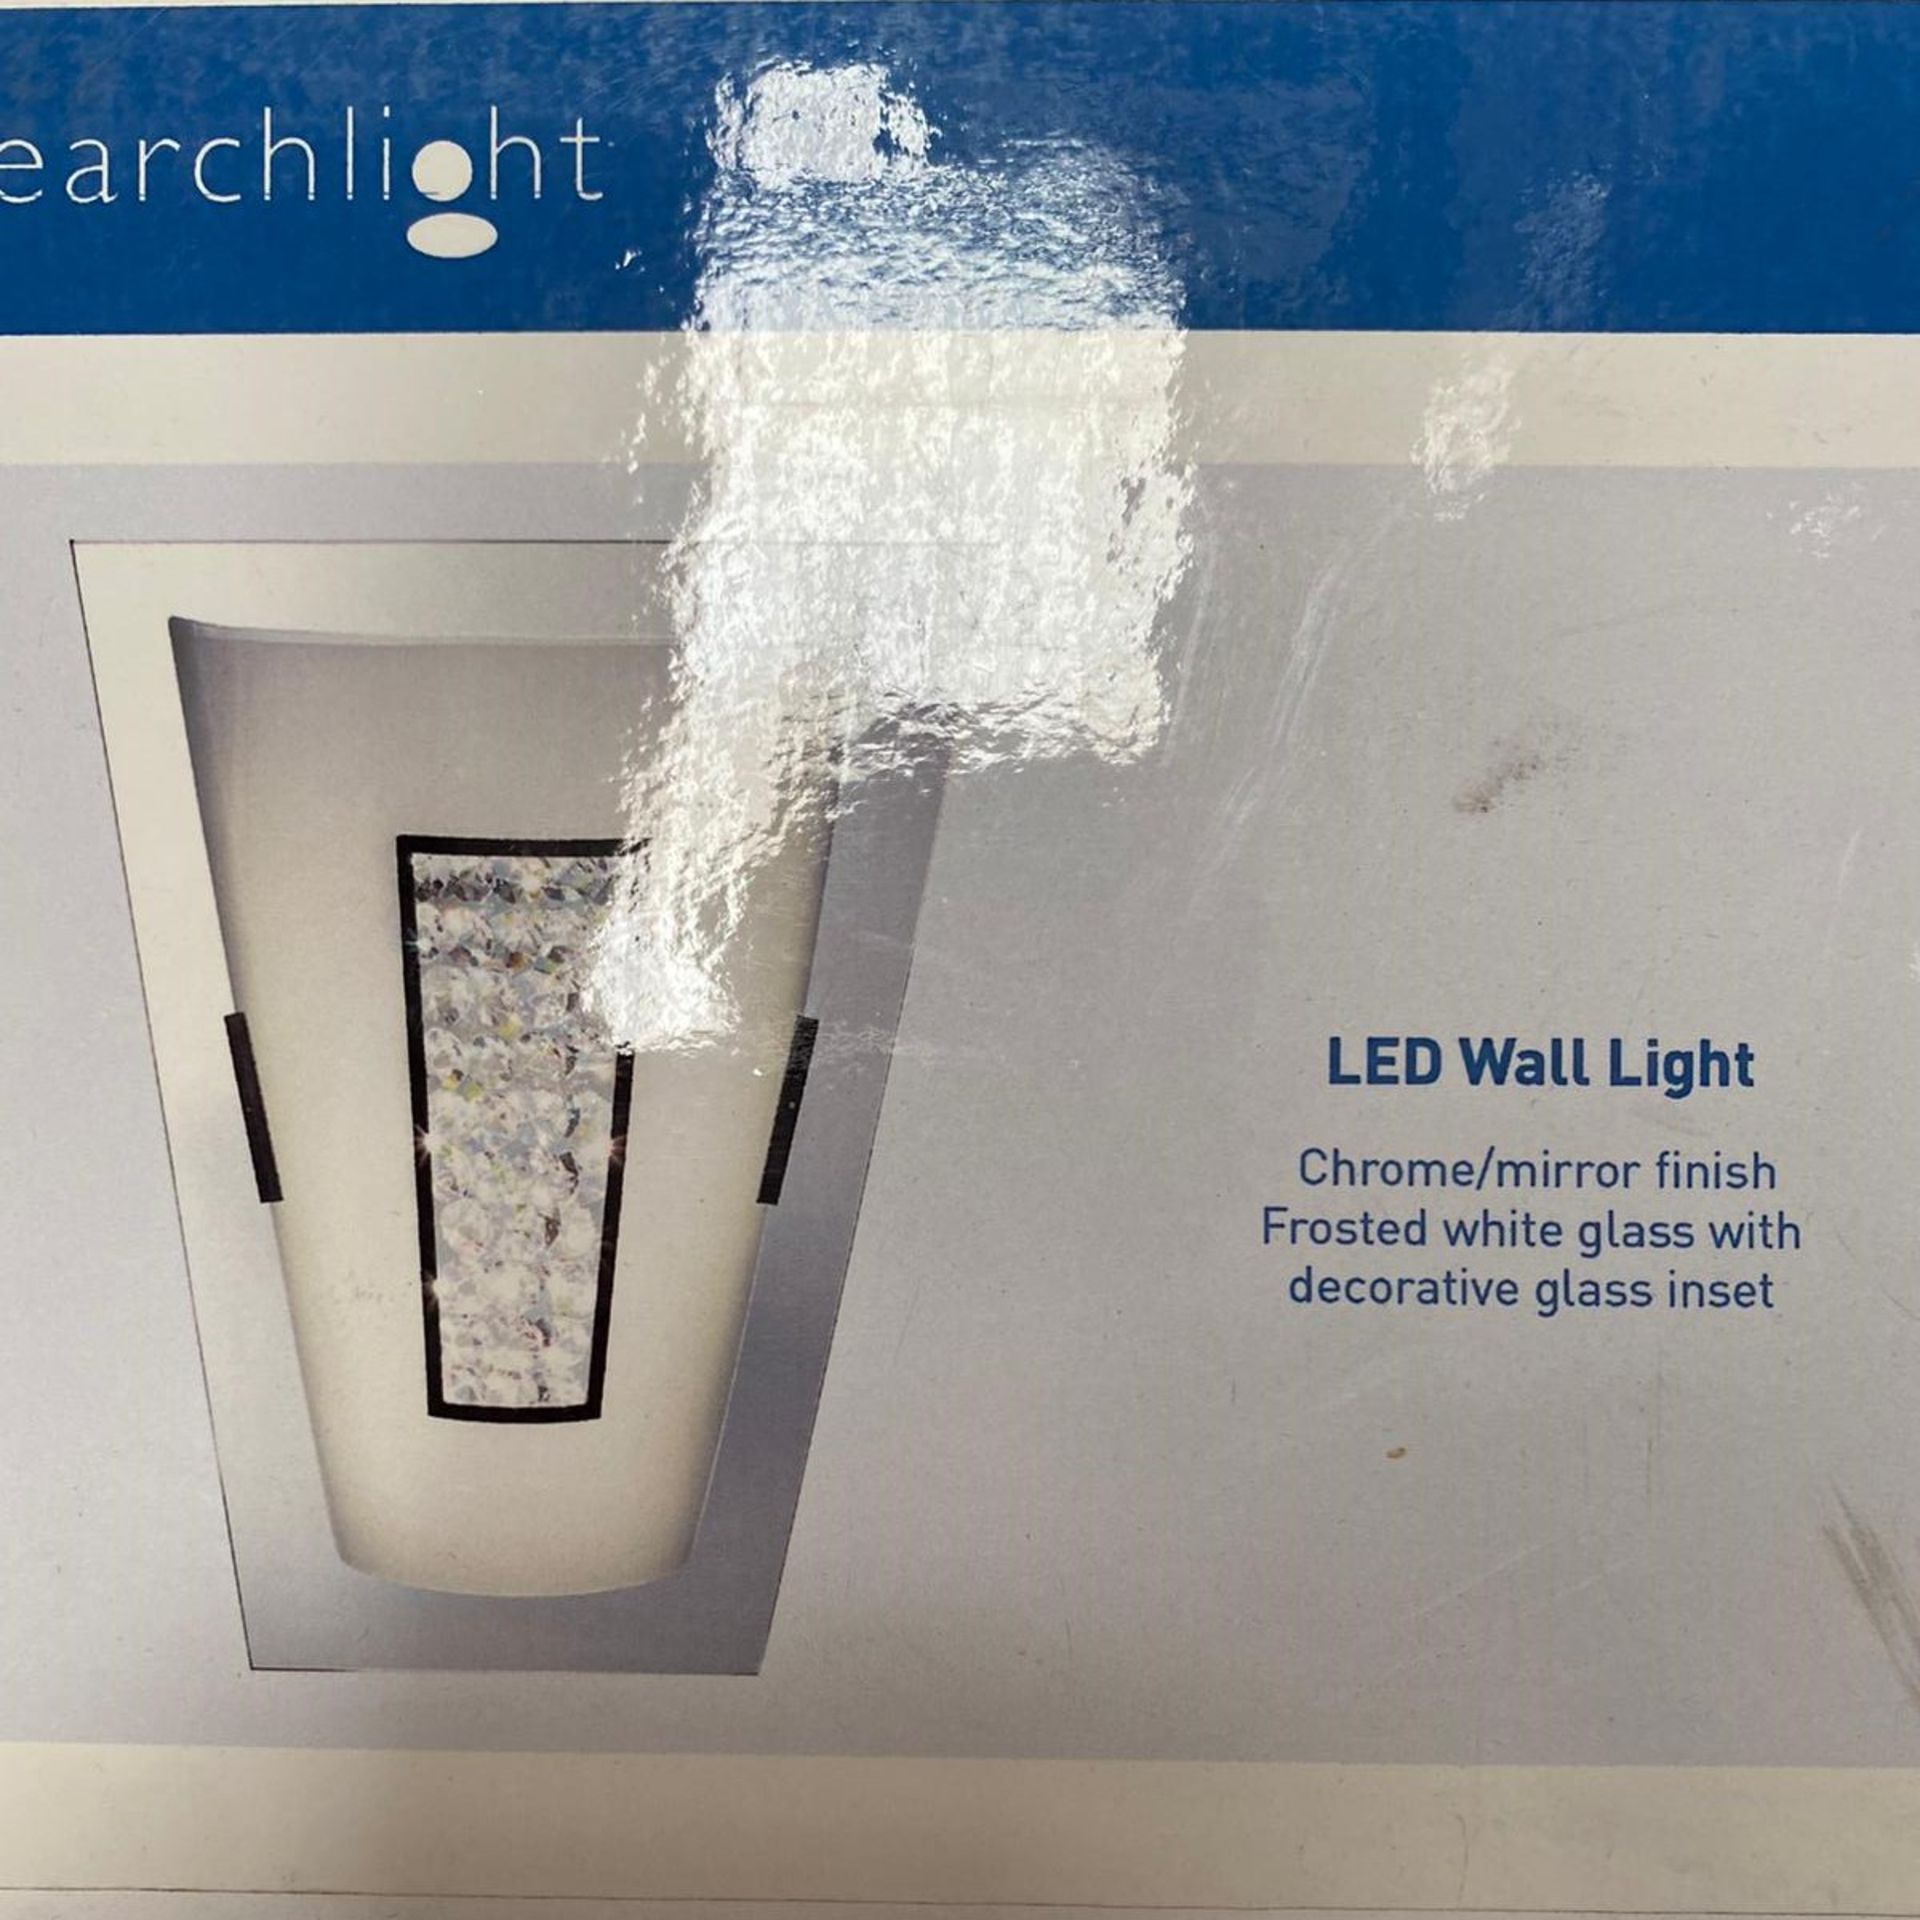 1 x Searchlight Chrome LED wall light with white glass - Ref: 3773-IP - New and Boxed - RRP: £110.40 - Image 2 of 4